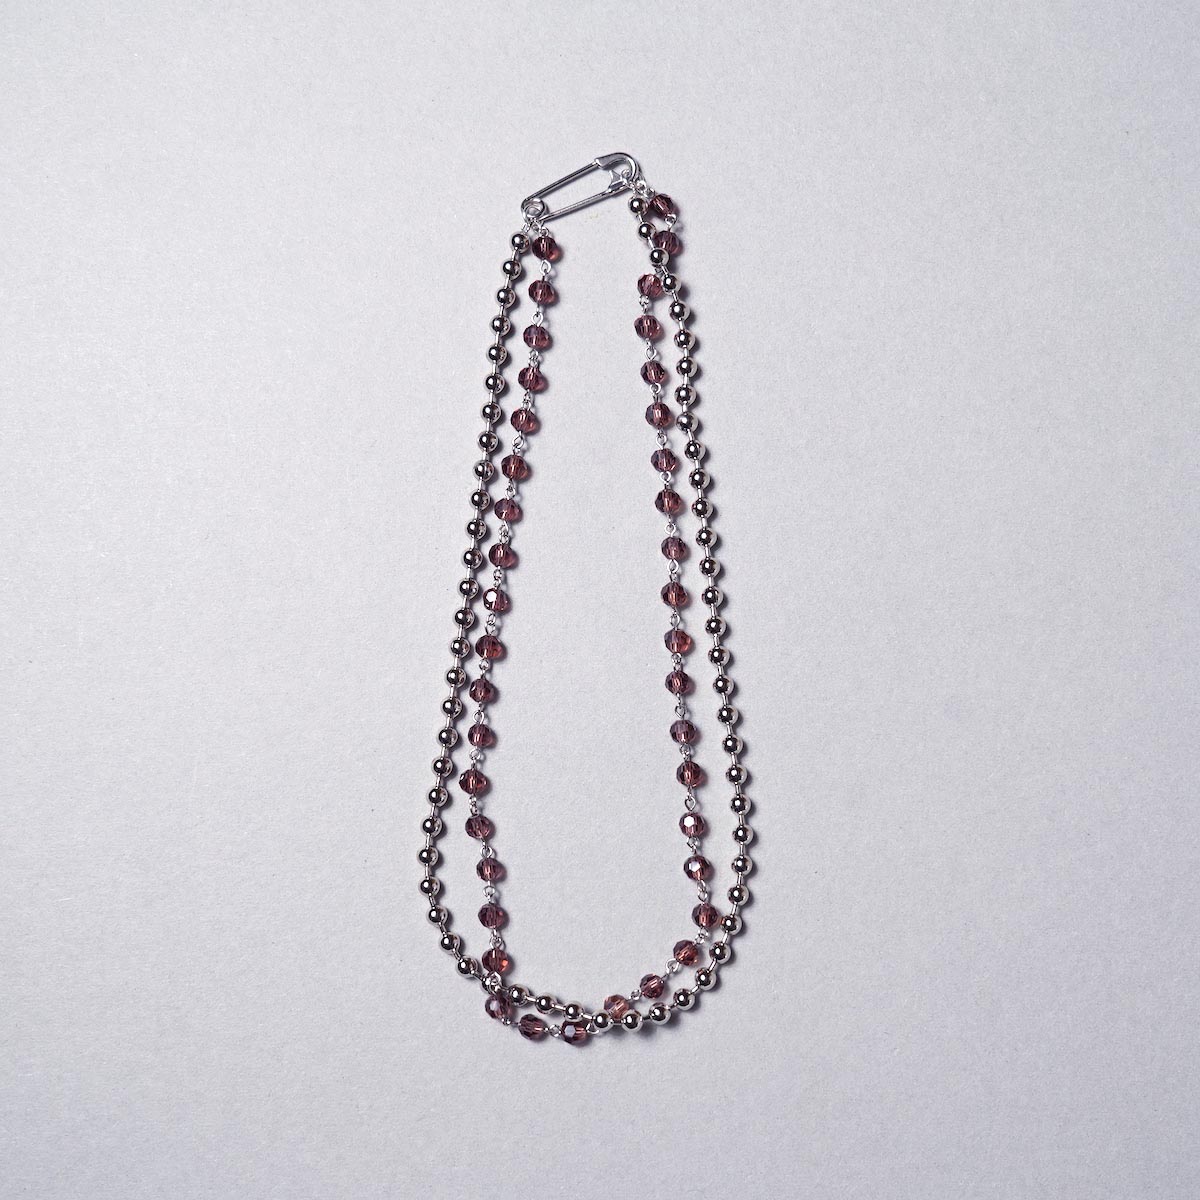 The Soloist / sa.0025AW22 single glass beads with ball chain neck lace. (Purple)